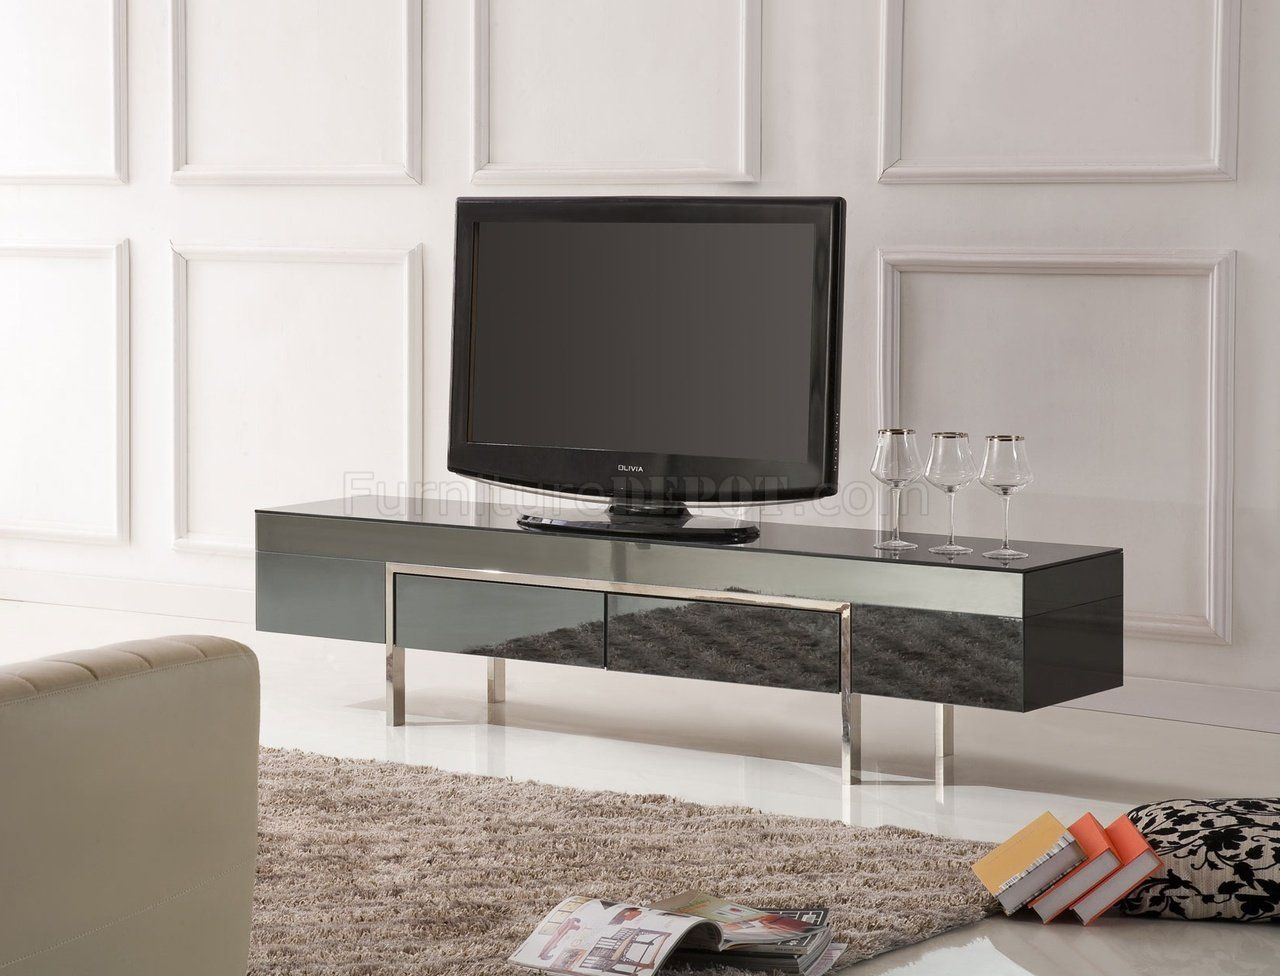 Black High Gloss Laquer Finish Modern Tv Stand W/metal Legs Intended For Stylish Tv Cabinets (View 10 of 15)